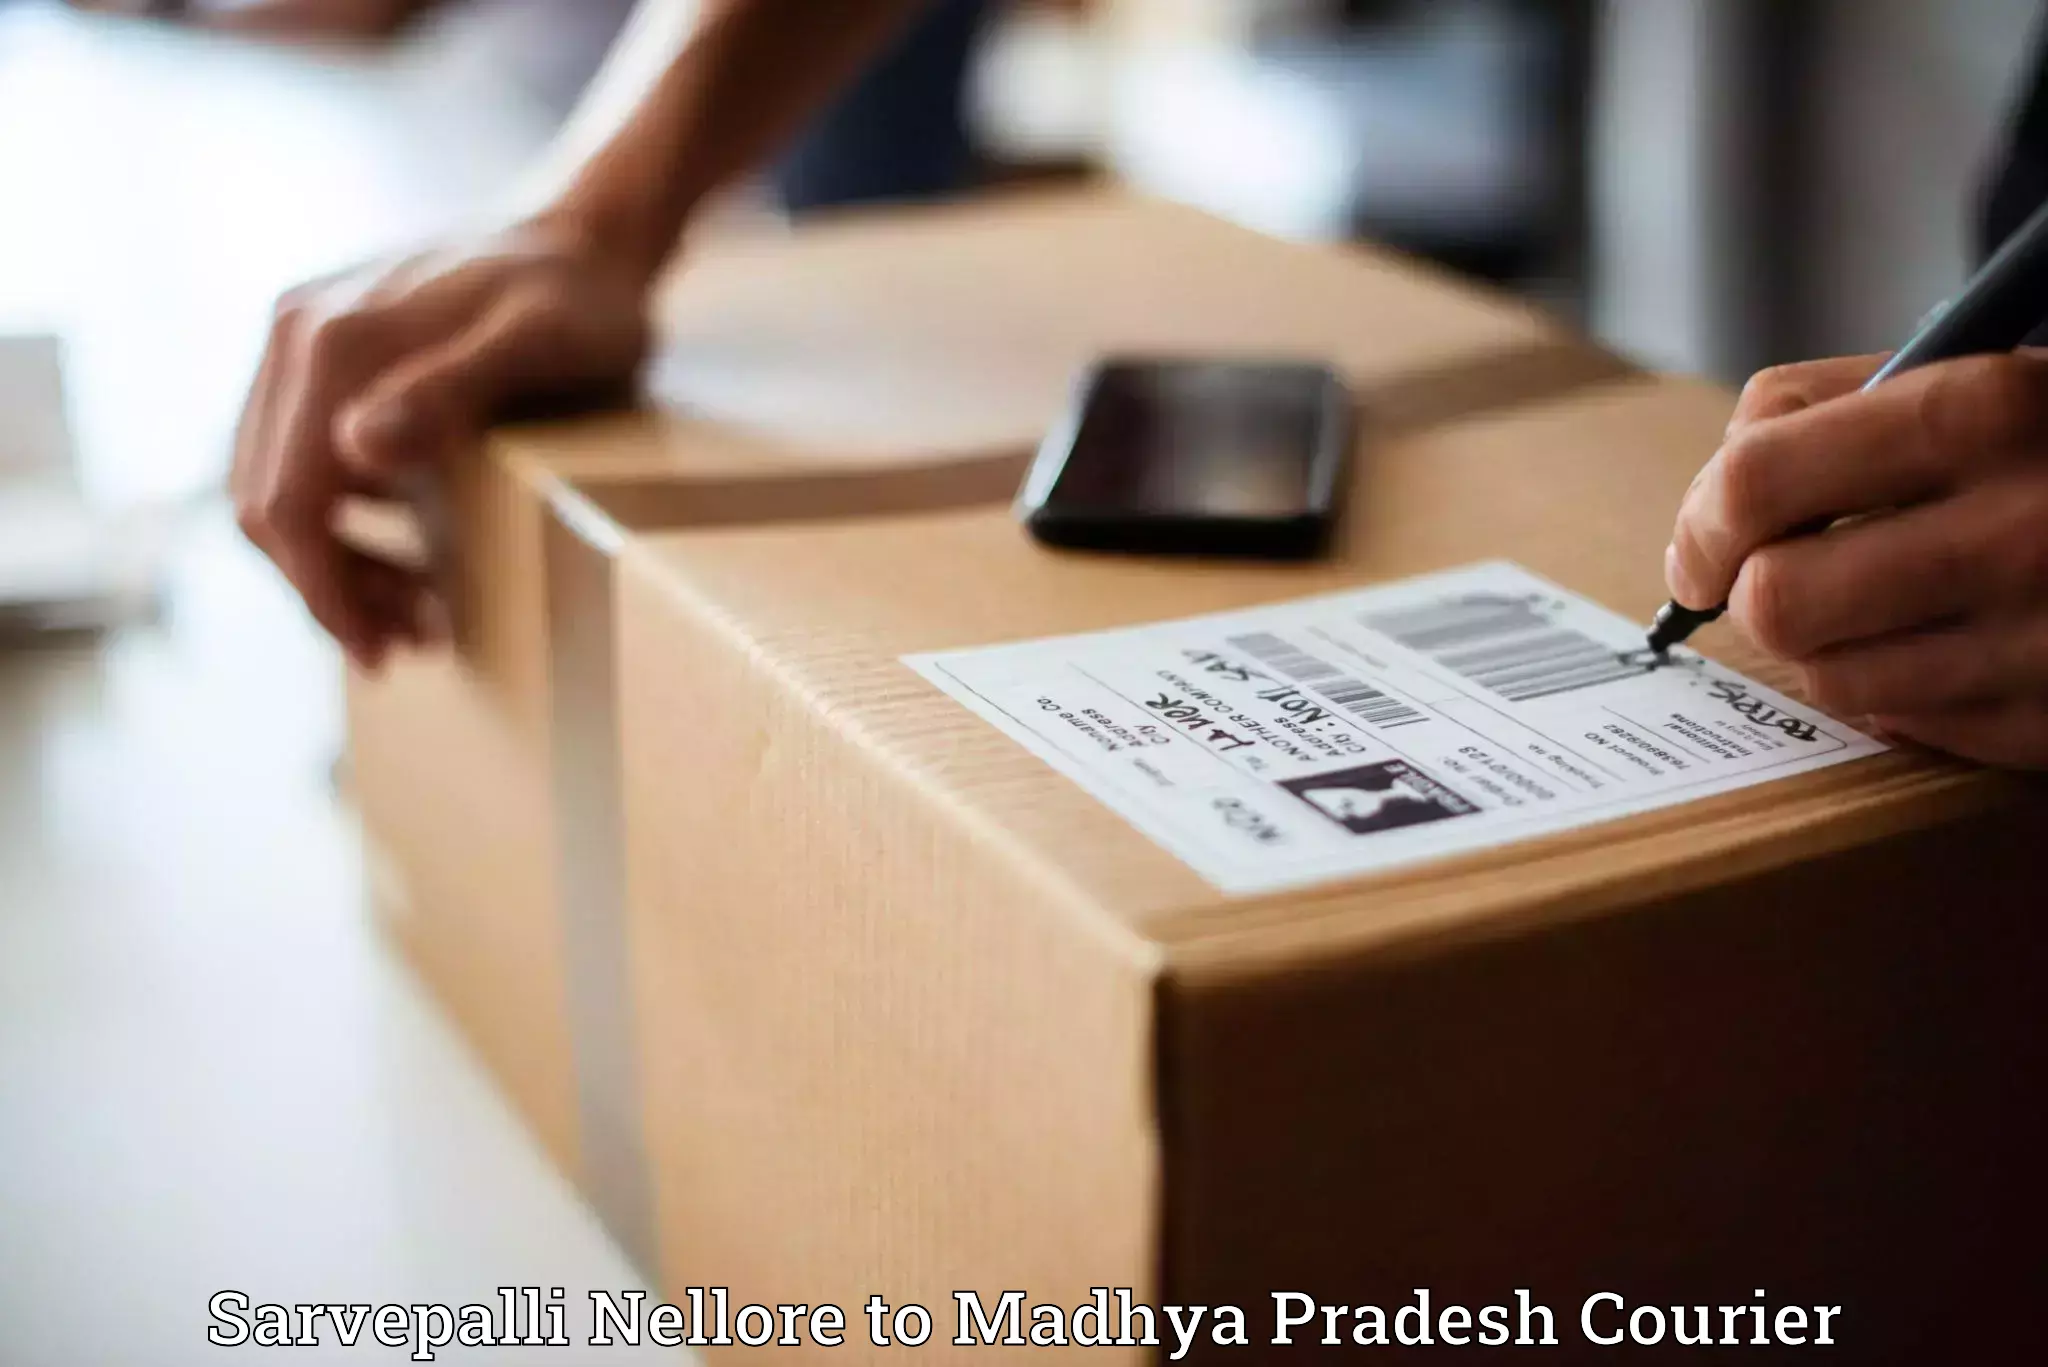 Expedited parcel delivery Sarvepalli Nellore to Kesali